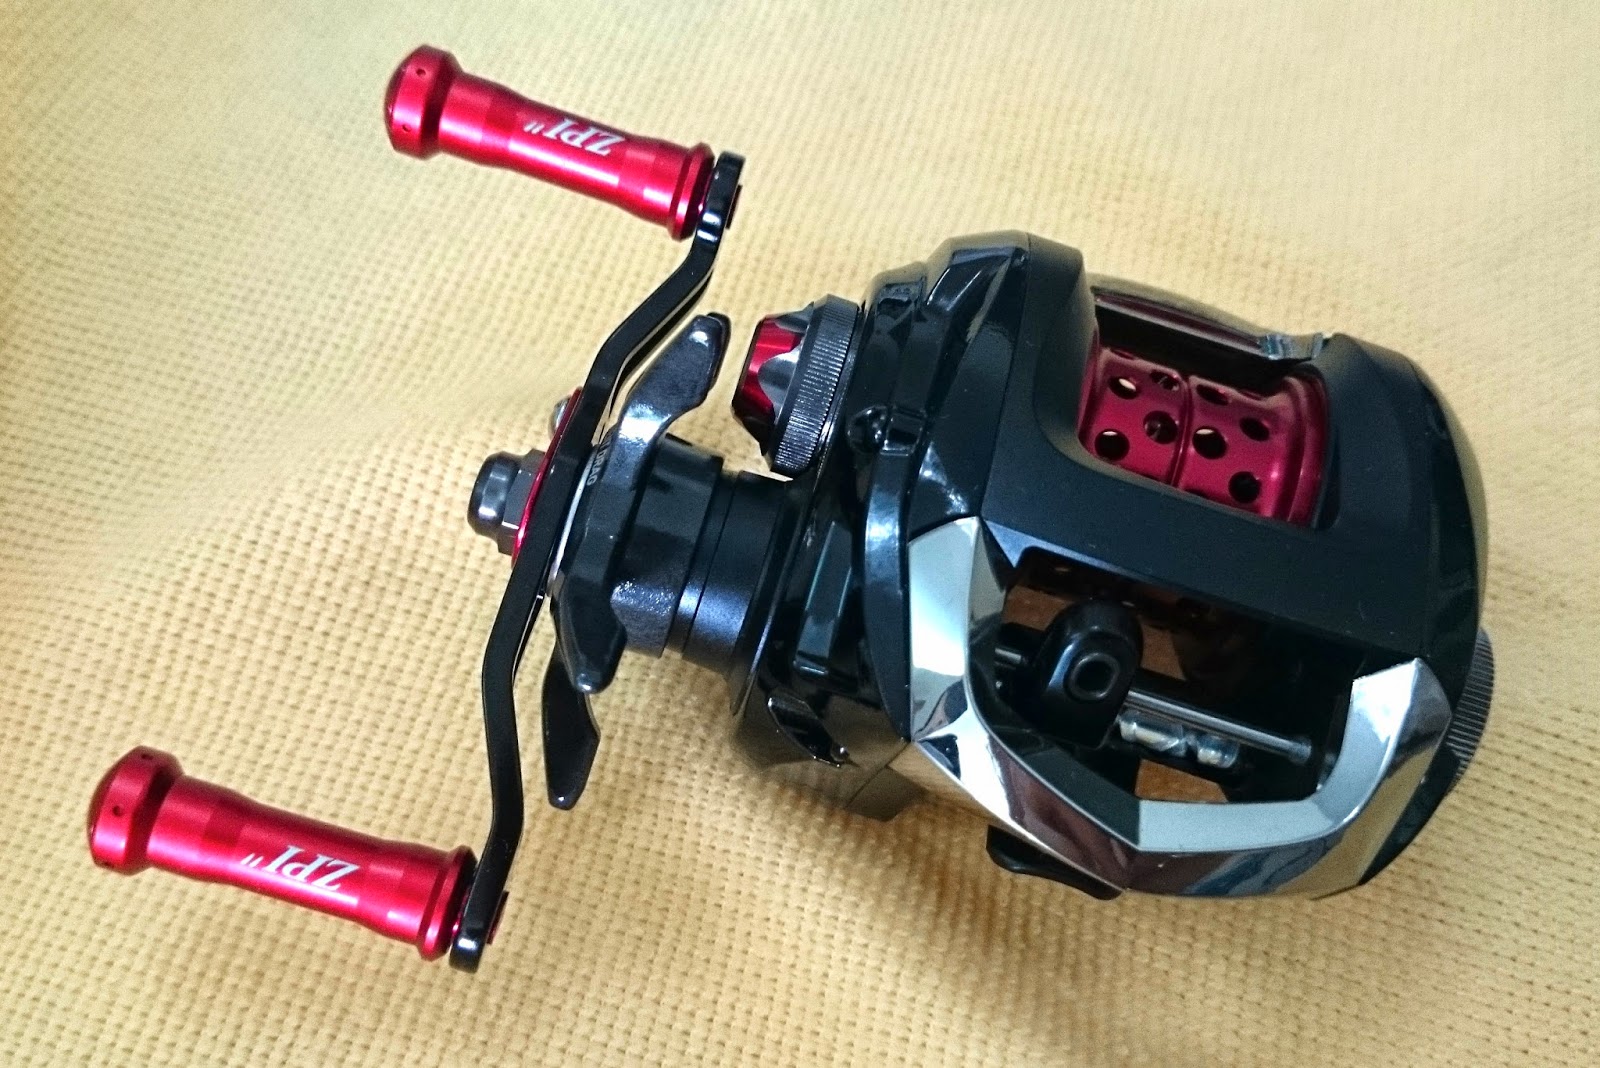 LURE × STYLE: Let's take a look: The Daiwa SS Air 8.1R